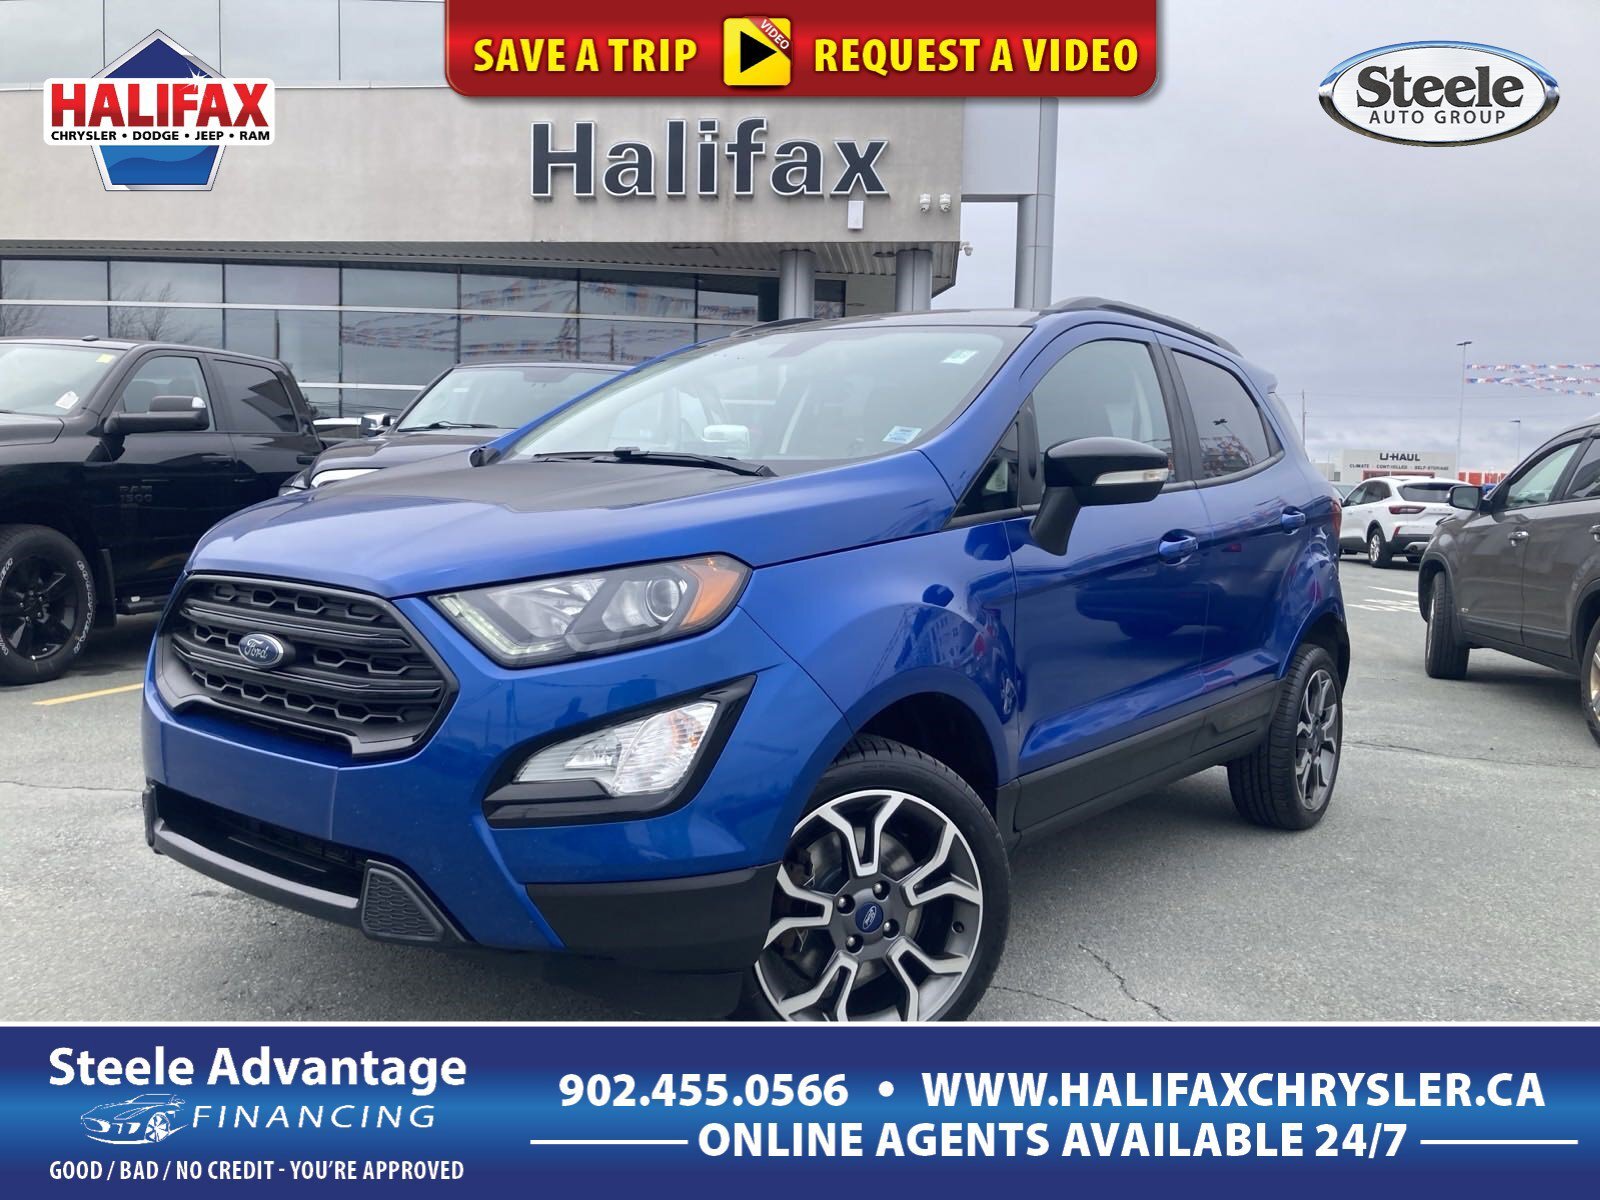 2019 Ford EcoSport SES - 4WD, NAV, HEATED LEATHER TRIMMED SEATS, SAFE